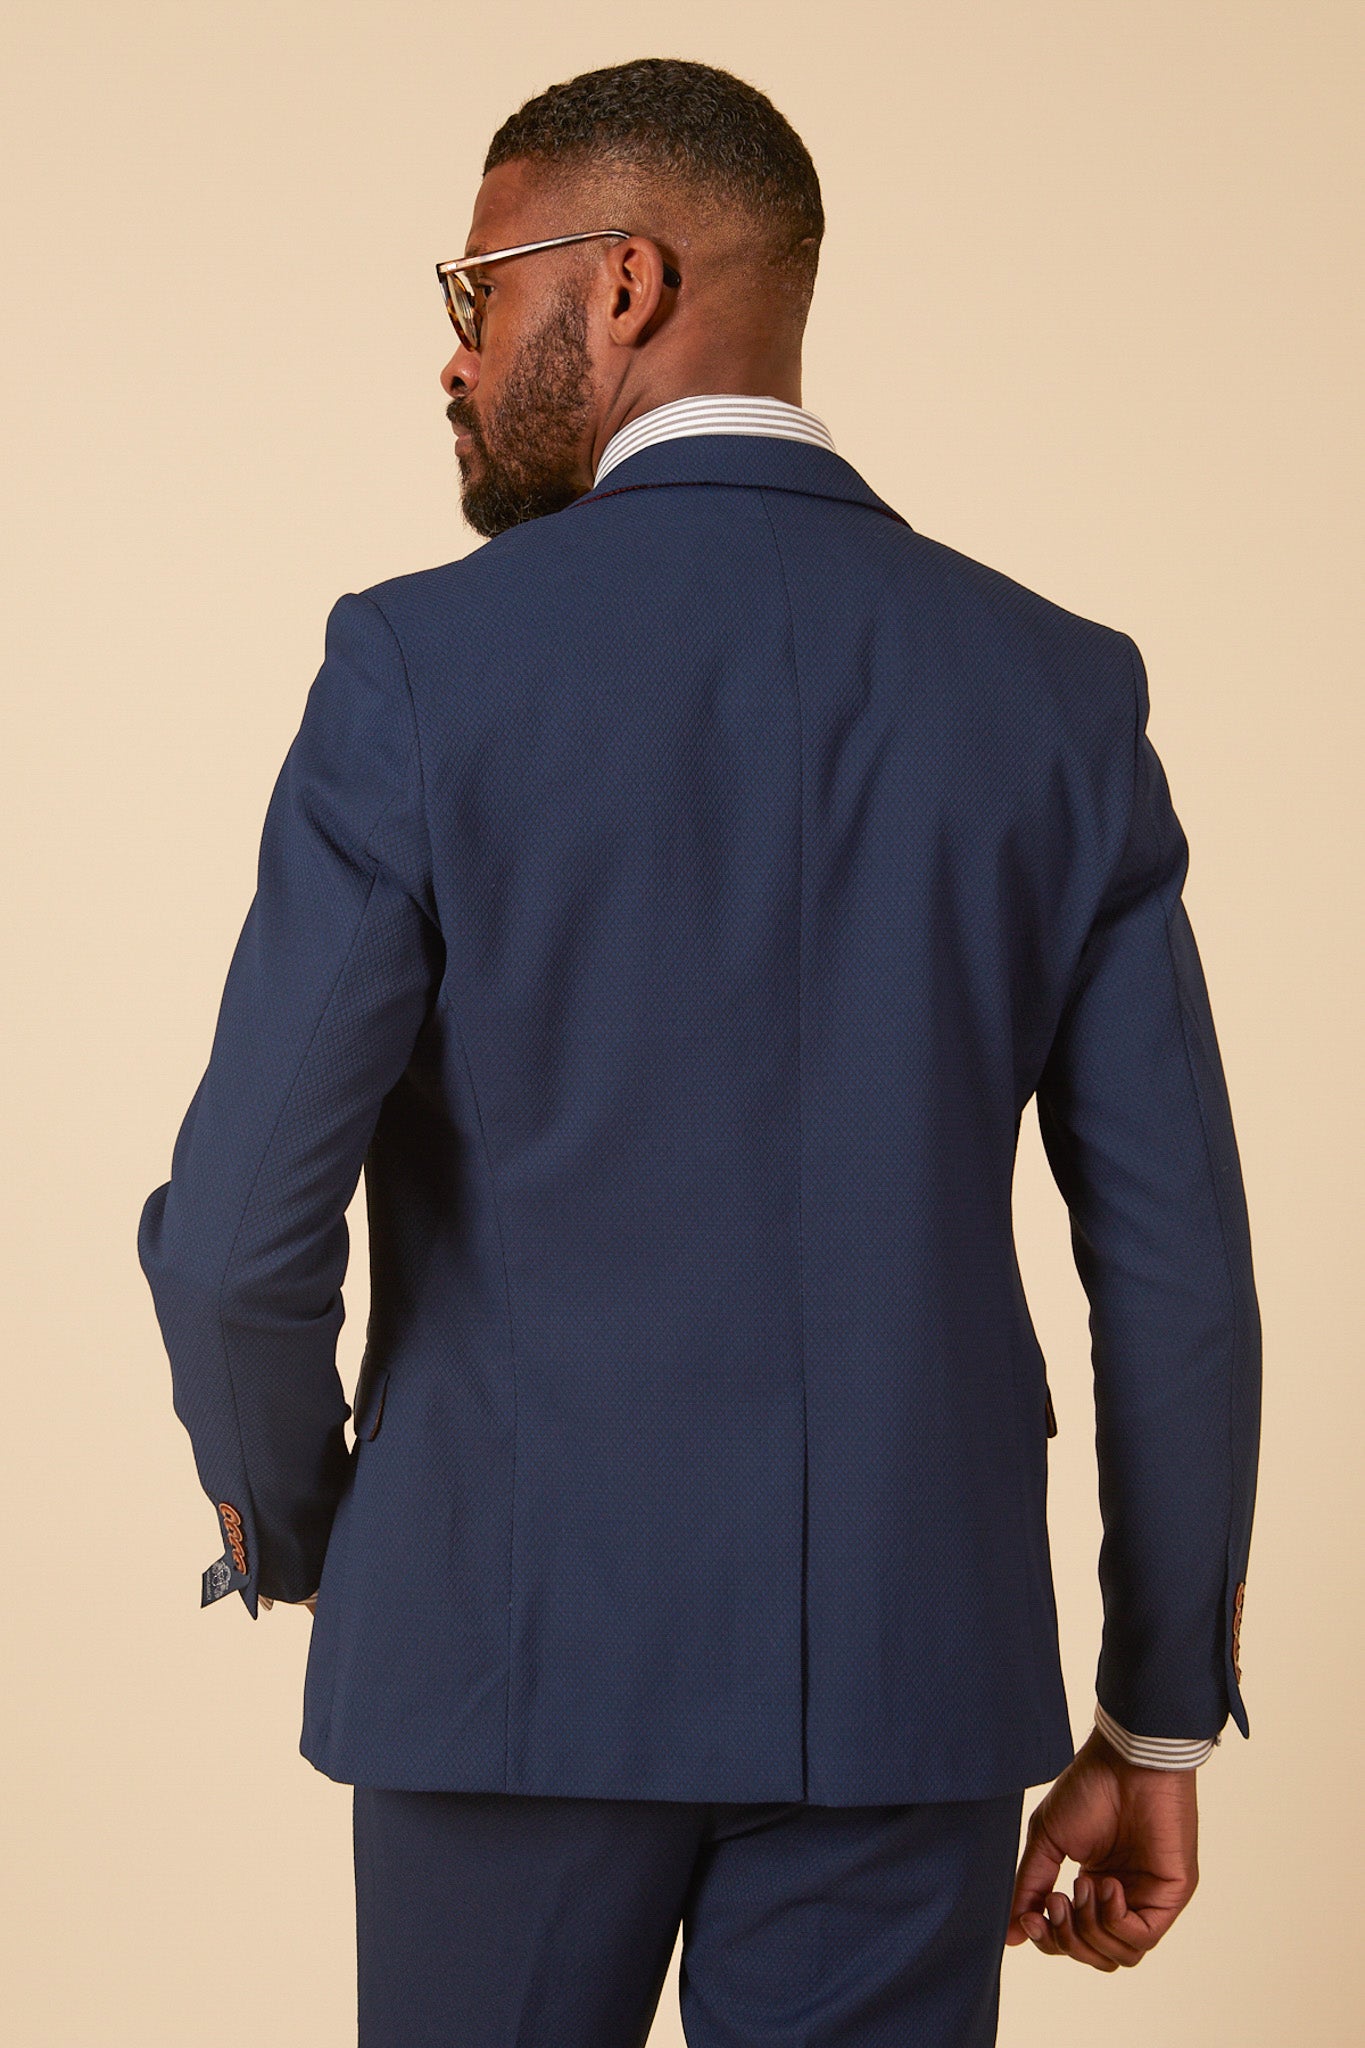 MAX - Royal Blue Three Piece Suit With Contrast Buttons-SUITS-marcdarcy-Marc Darcy